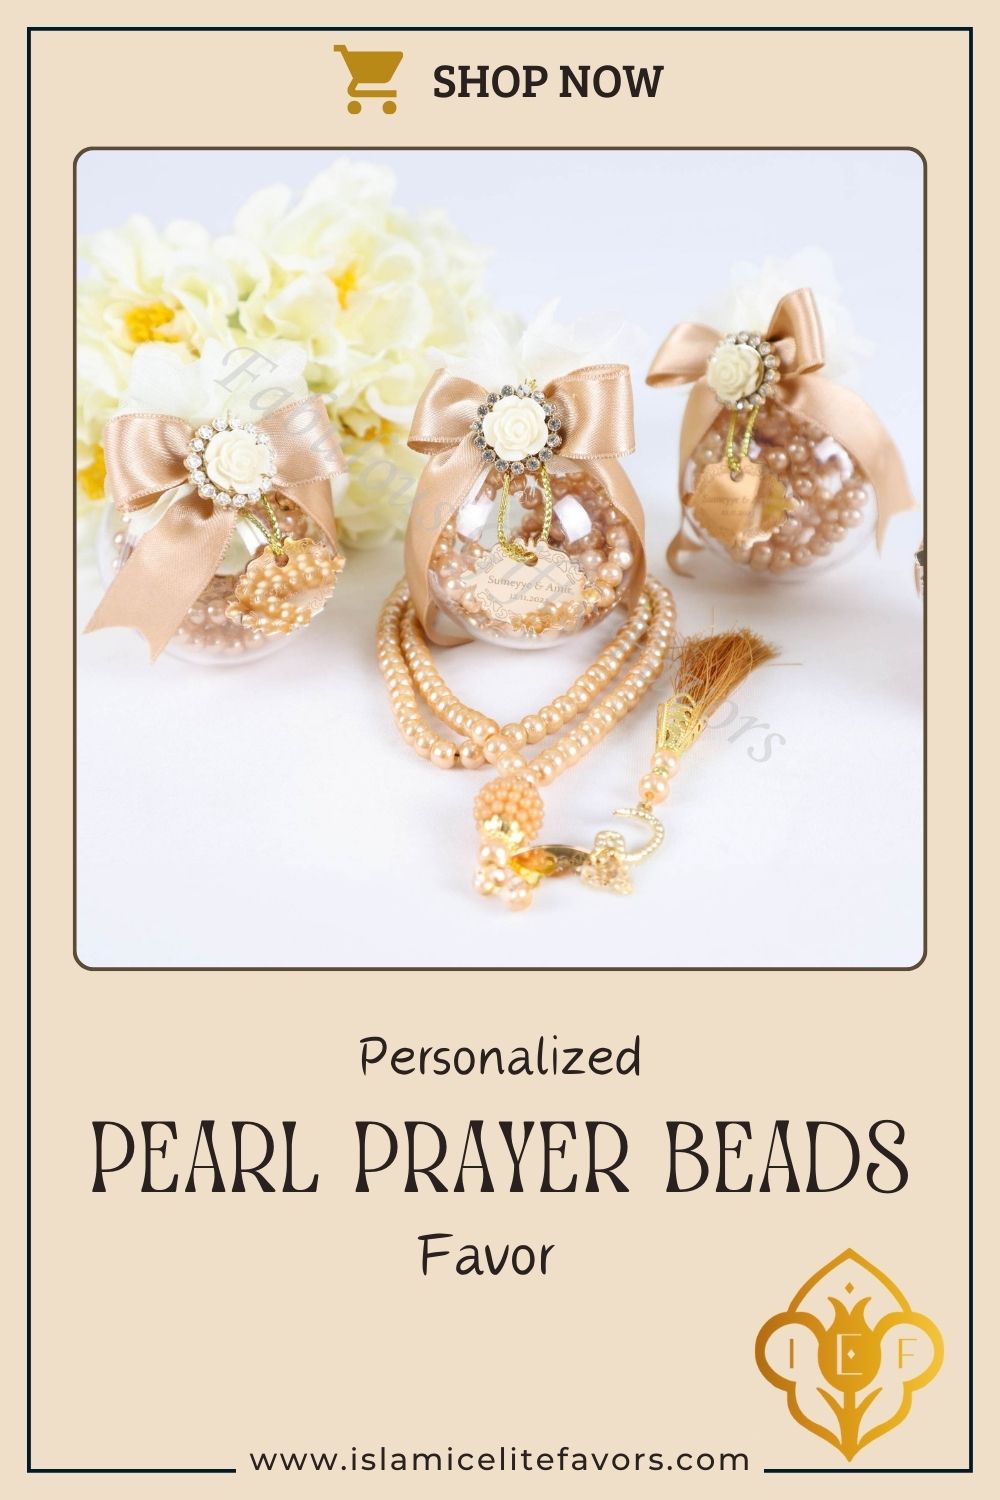 Personalized Pearl Prayer Bead Muslim Wedding Baby Shower Ramadan Gift - Islamic Elite Favors is a handmade gift shop offering a wide variety of unique and personalized gifts for all occasions. Whether you're looking for the perfect Ramadan, Eid, Hajj, wedding gift or something special for a birthday, baby shower or anniversary, we have something for everyone. High quality, made with love.